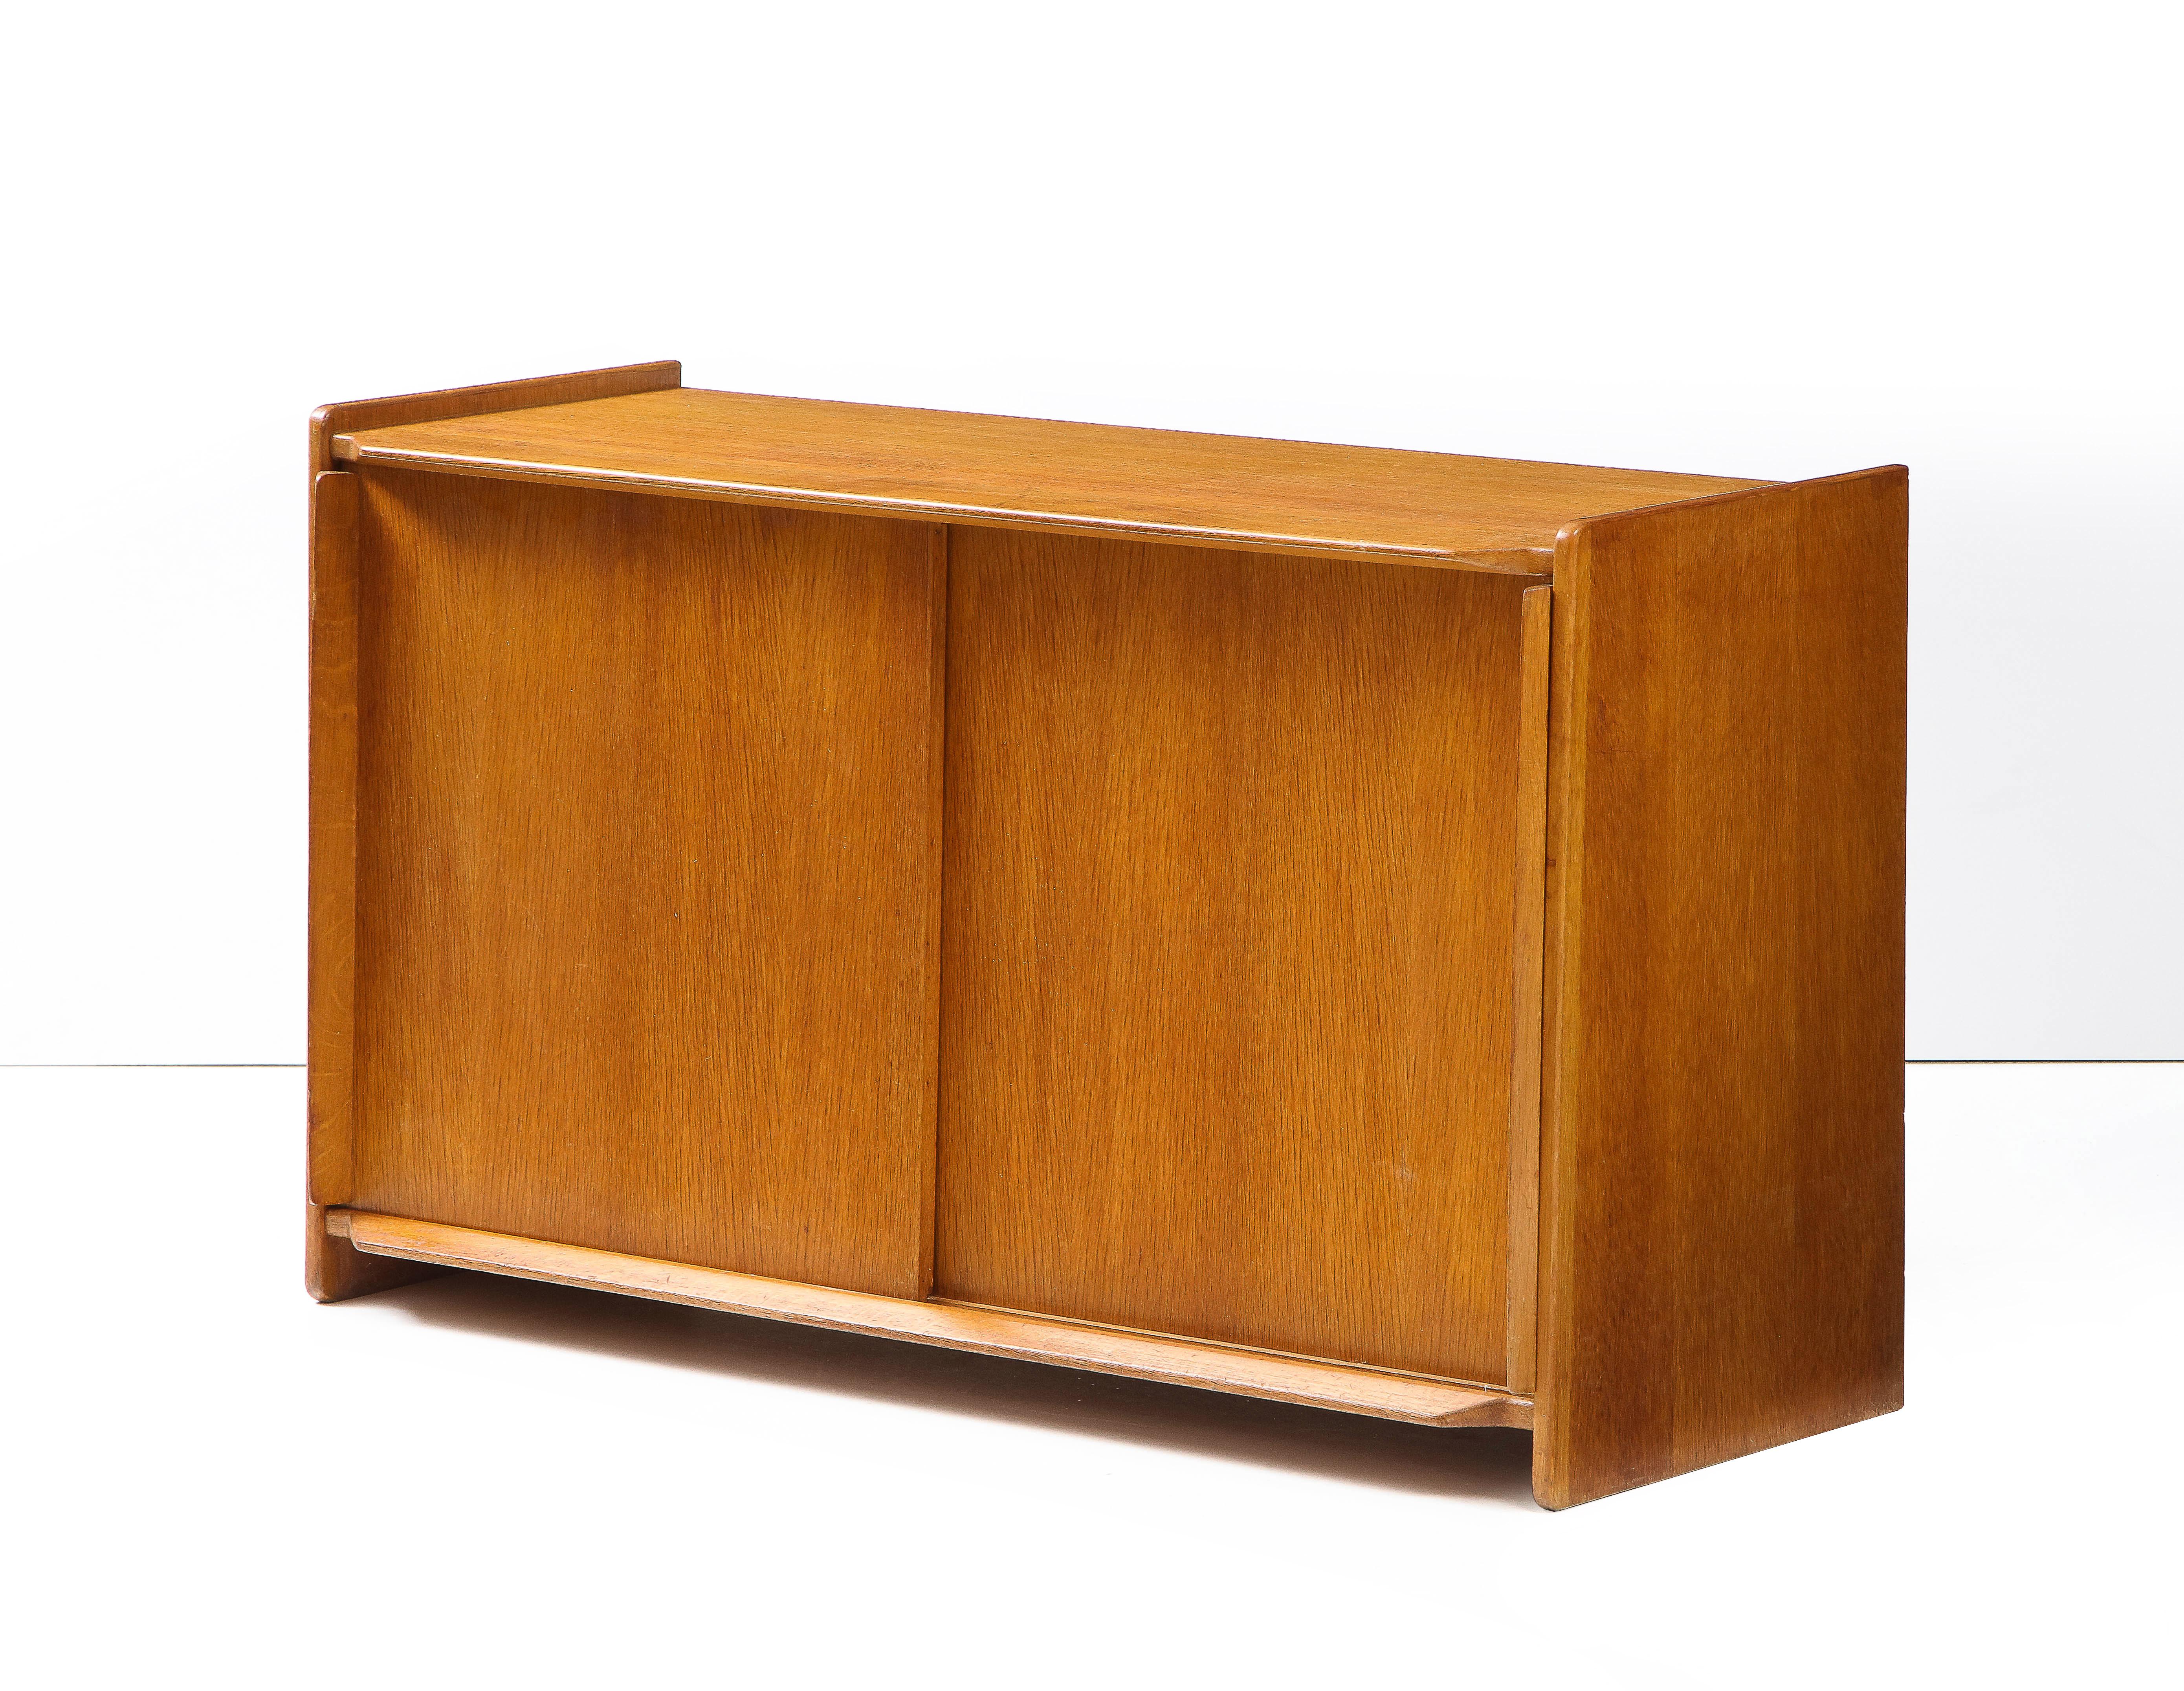 Mid-20th Century Solid Oak French Modernist Low Sideboard, France, c. 1960